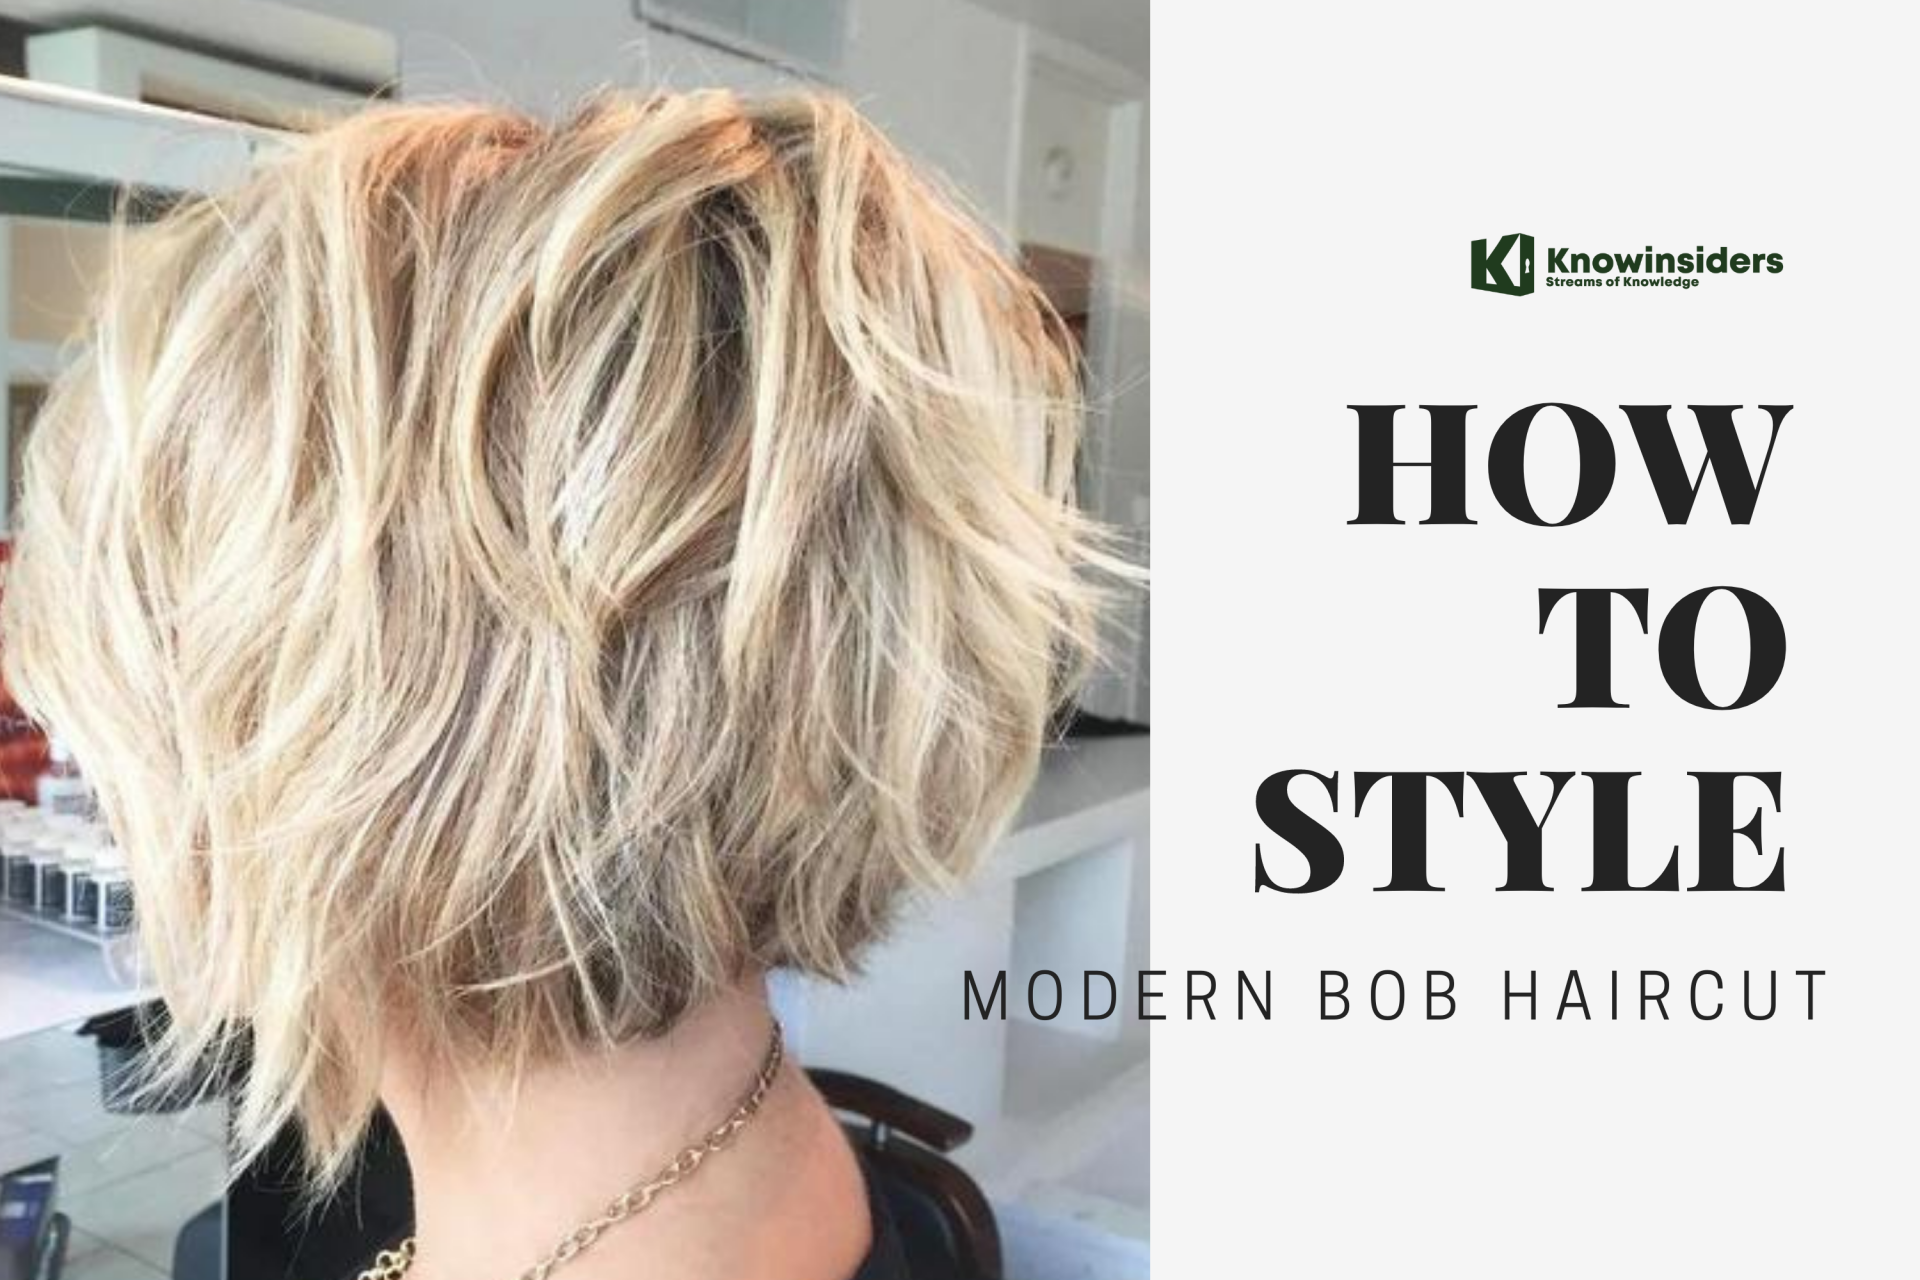 How To Style & Take Care Of Bob Haircut In New Ways | KnowInsiders